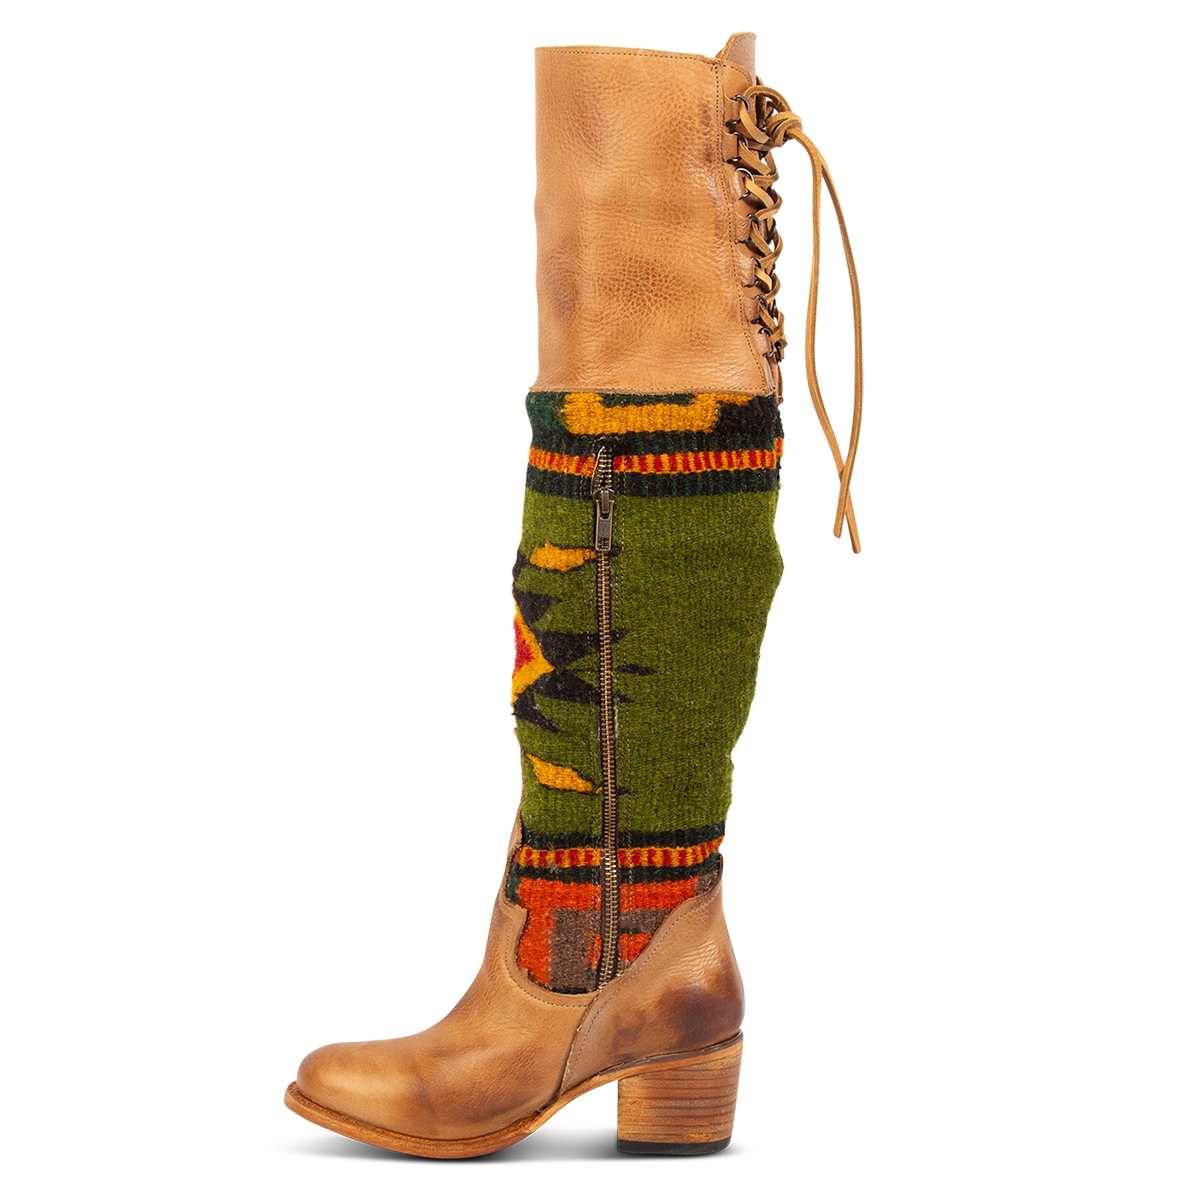 Inside view showing an inside working brass zipper, adjustable leather lacing, and multi-colored woven detailing on FREEBIRD women's Serape tan leather knee high boot